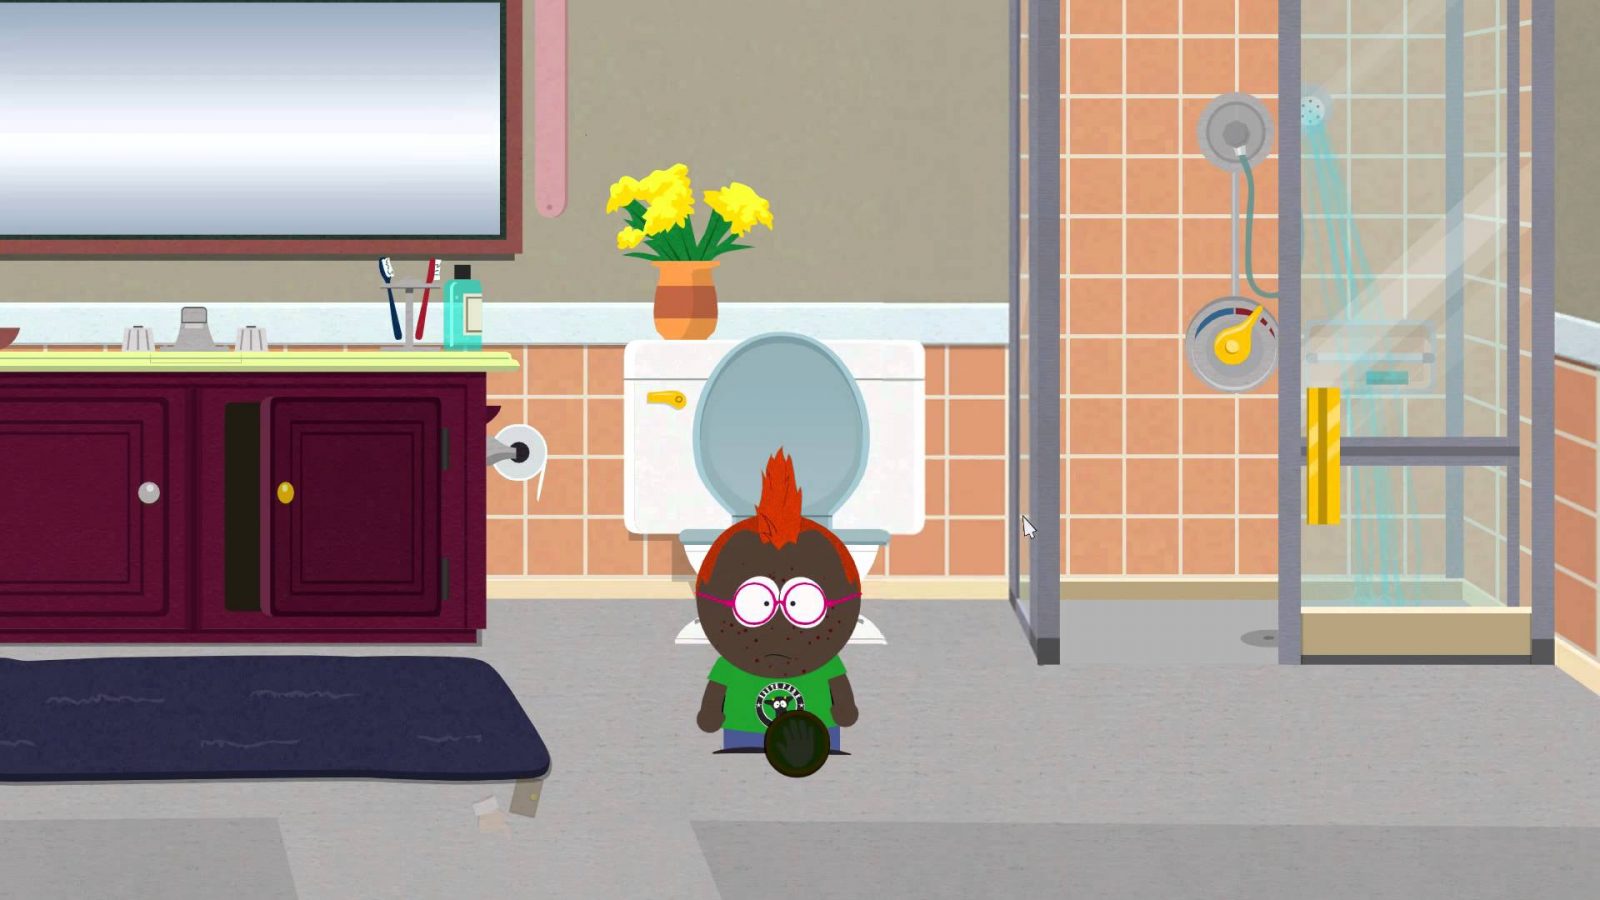 Farting In The Shower And Pooping. Only in South Park